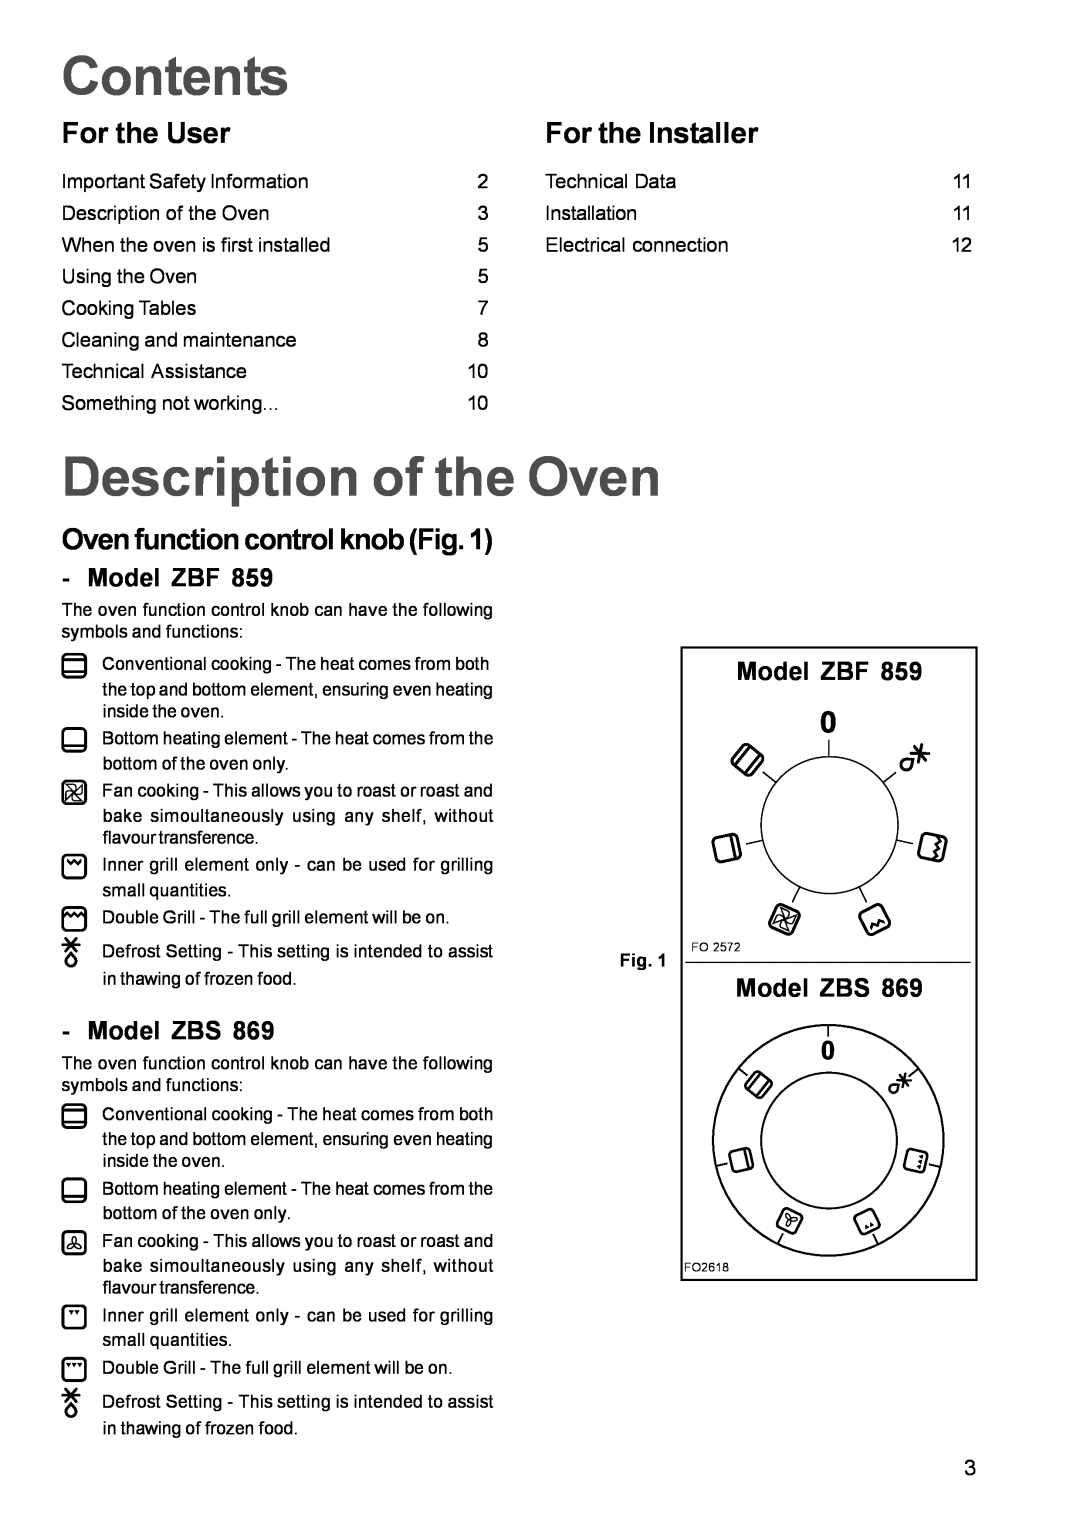 Zanussi ZBF 859 manual Contents, Description of the Oven, For the User, For the Installer, Oven function control knob Fig 